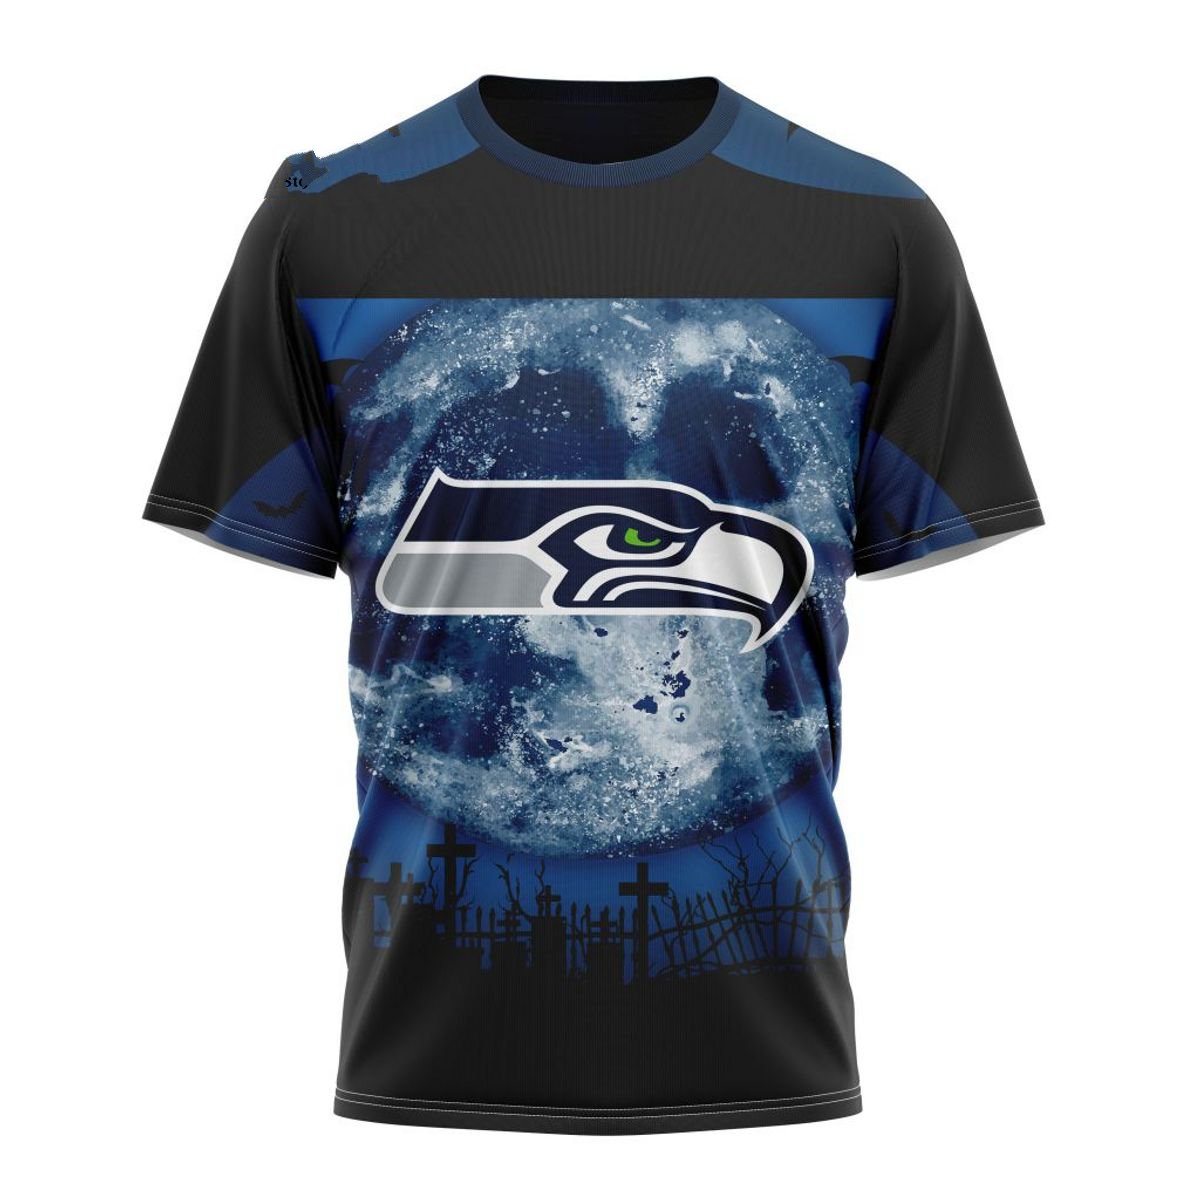 SEATTLE SEAHAWKS 3D HOODIE CONCEPTS KITS